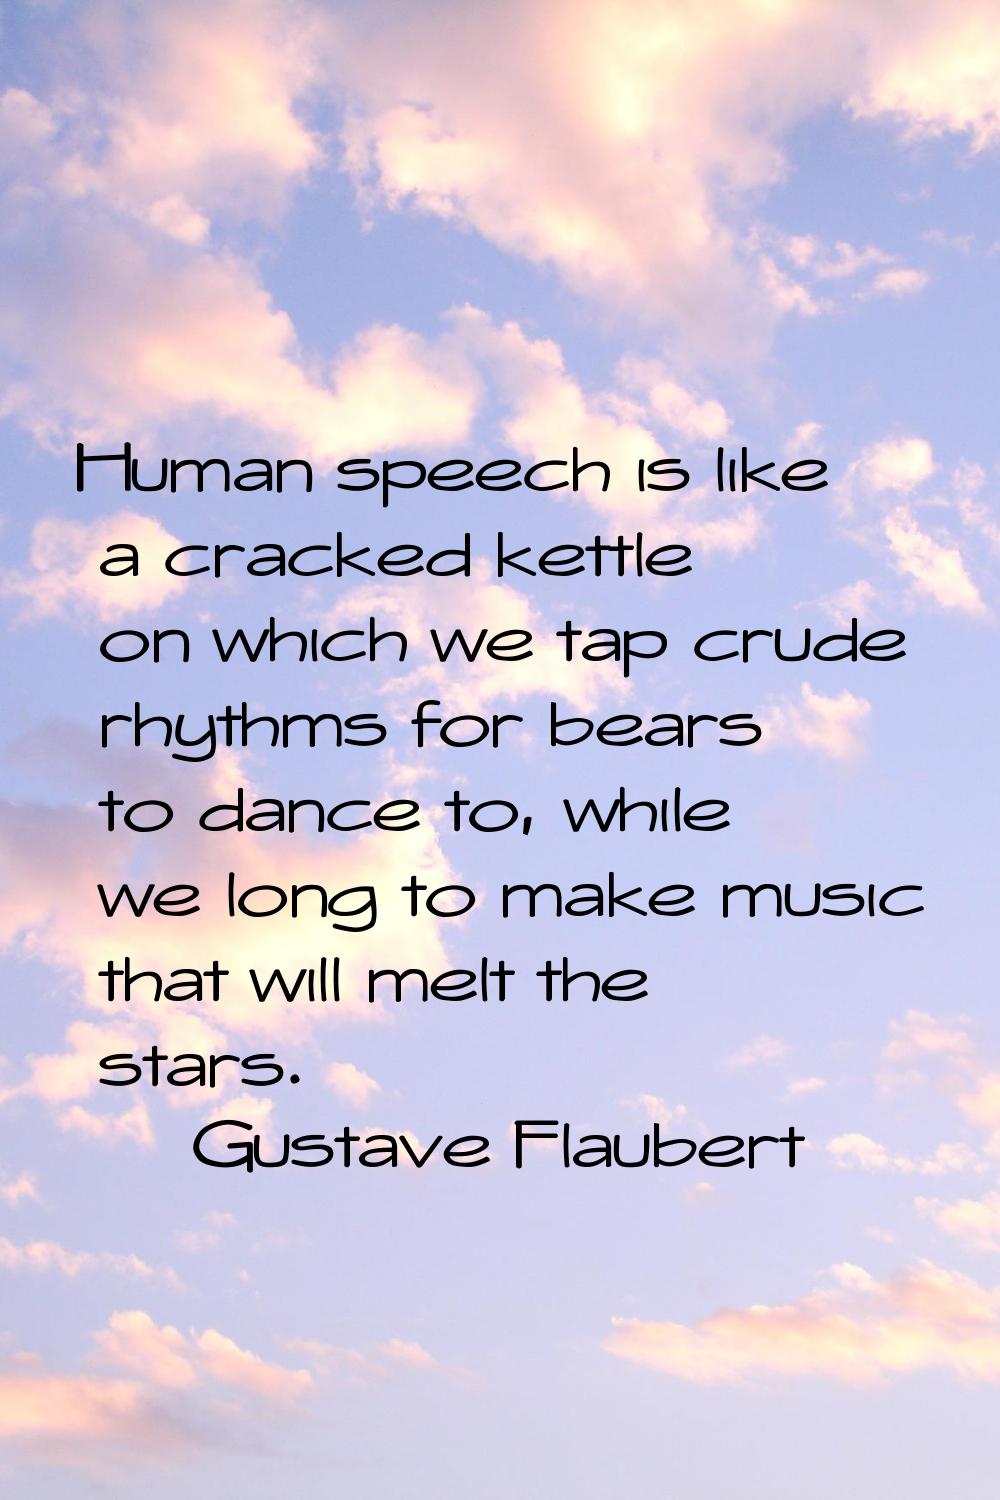 Human speech is like a cracked kettle on which we tap crude rhythms for bears to dance to, while we